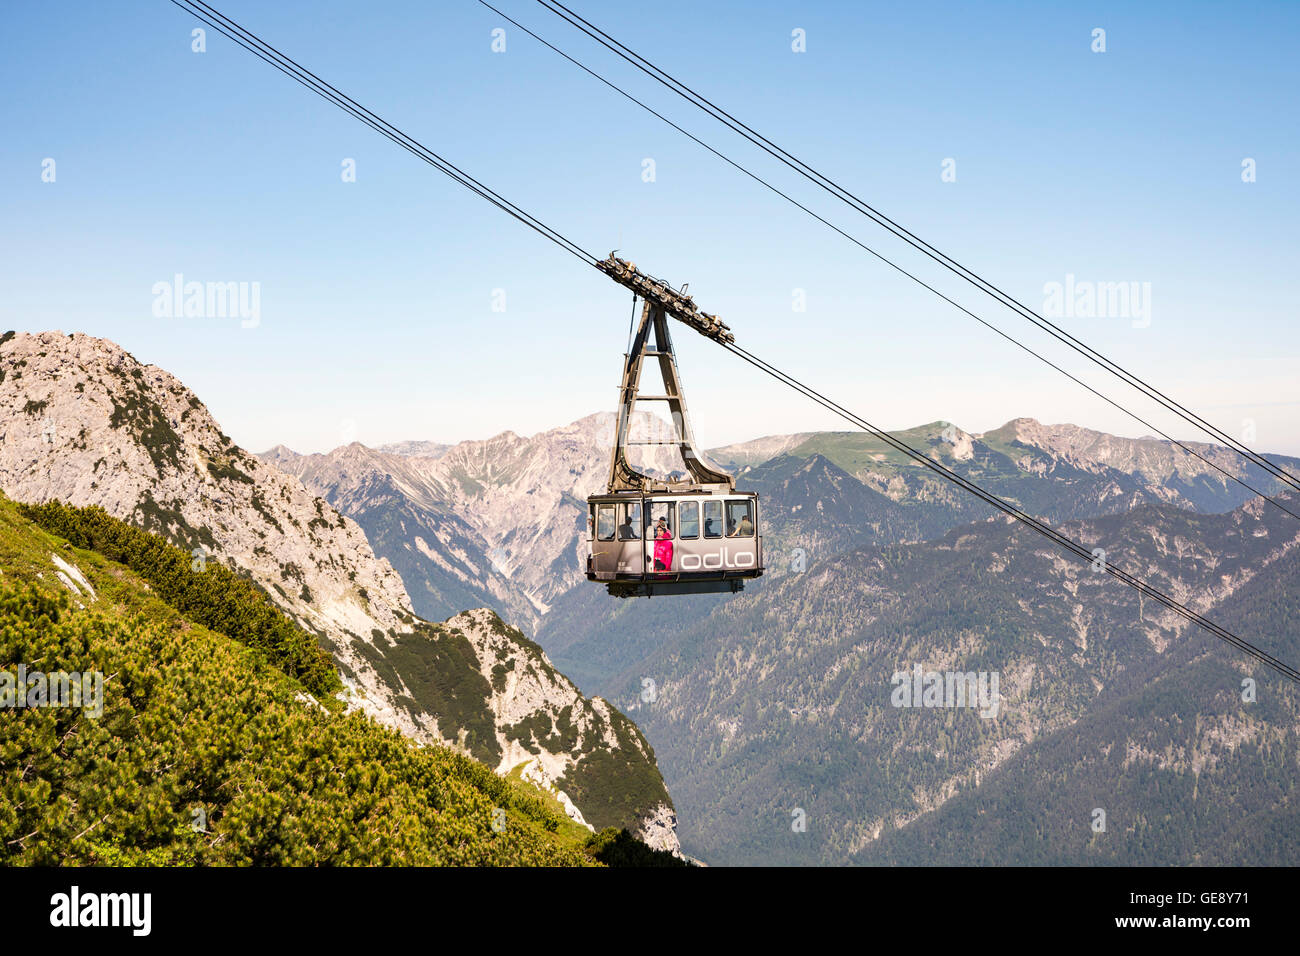 Londres Más lejano Vástago GARMISCH, GERMANY - JULY 10: Cable car at the Osterfeldkopf mountain in  Garmisch, Germany on July 10, 2016. The Alpspitzbahn cab Stock Photo - Alamy